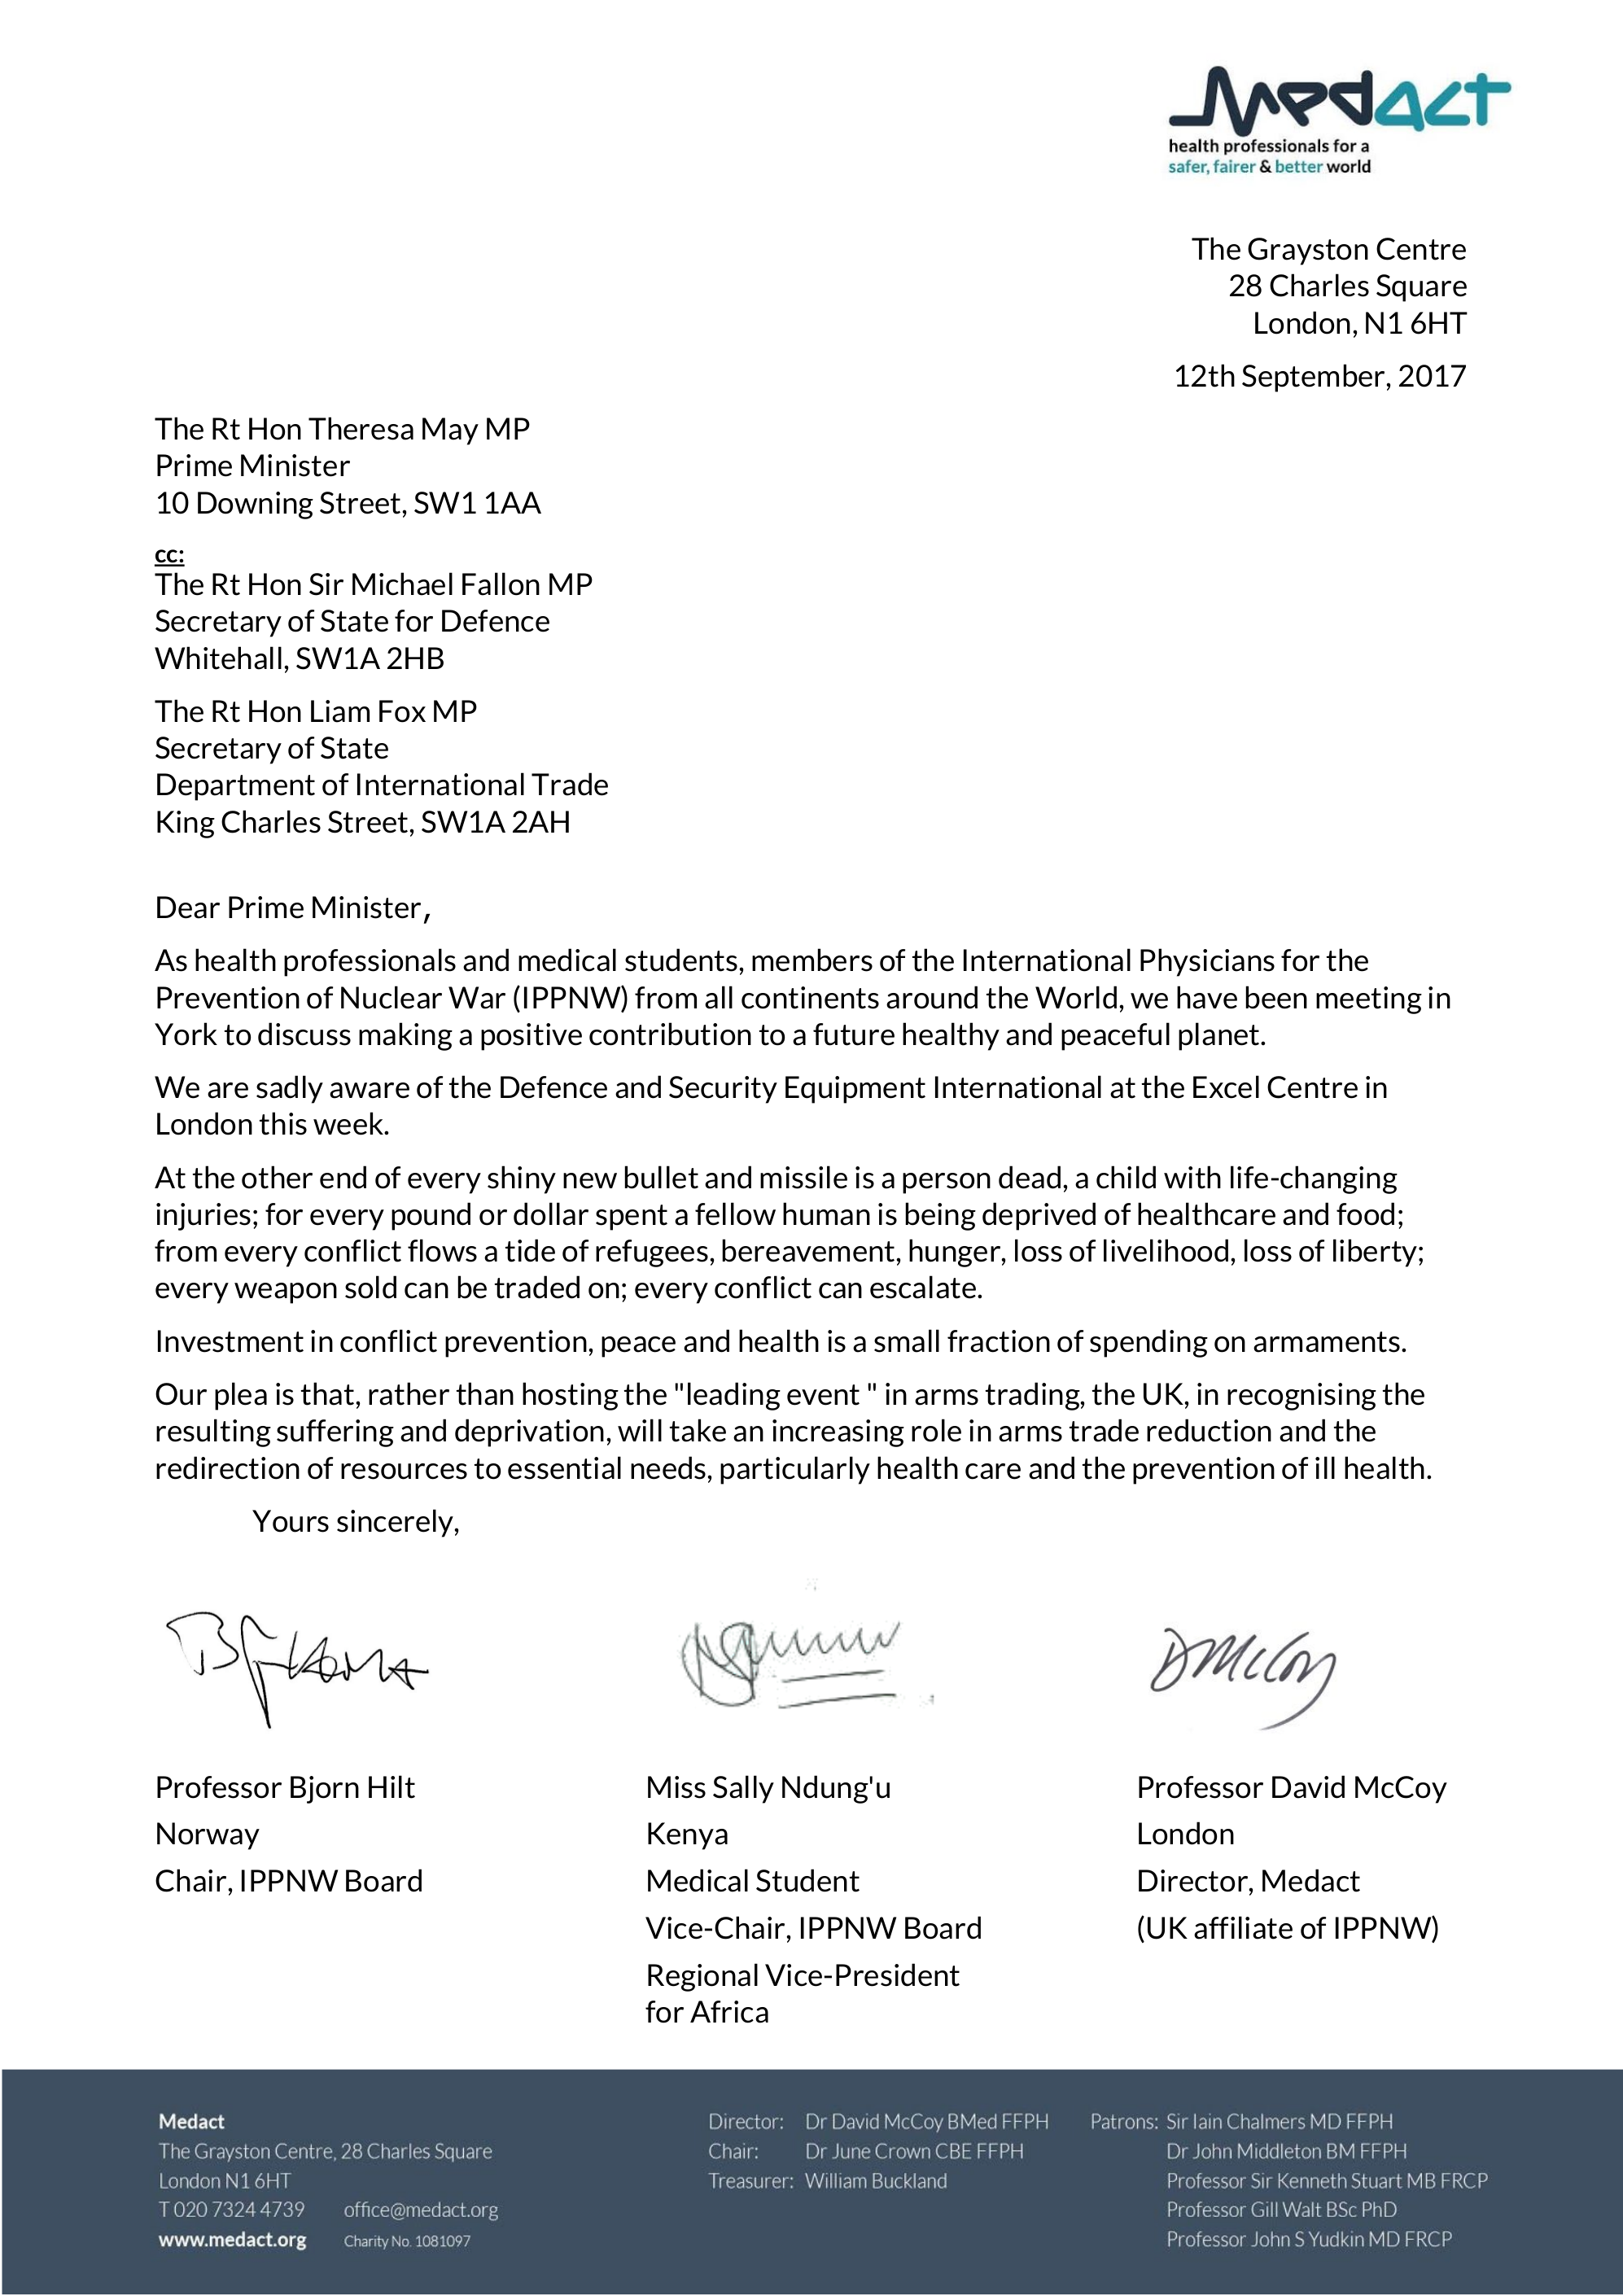 Letter from IPPNW Congress to British ministers re: DSEI arms fare